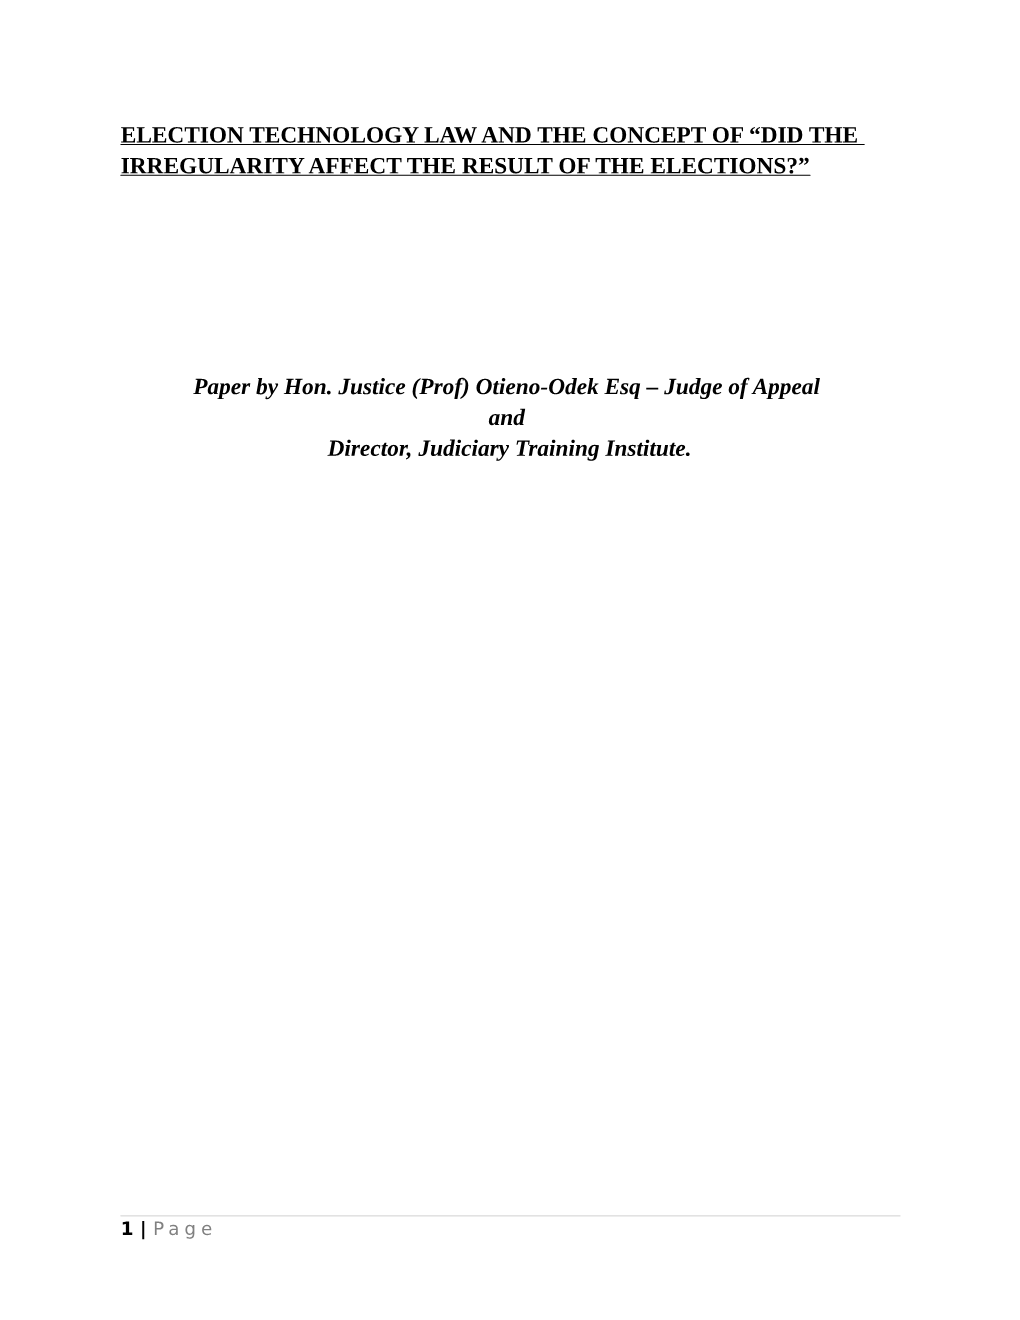 Election Technology Law and the Concept of “Did the Irregularity Affect the Result of the Elections?”